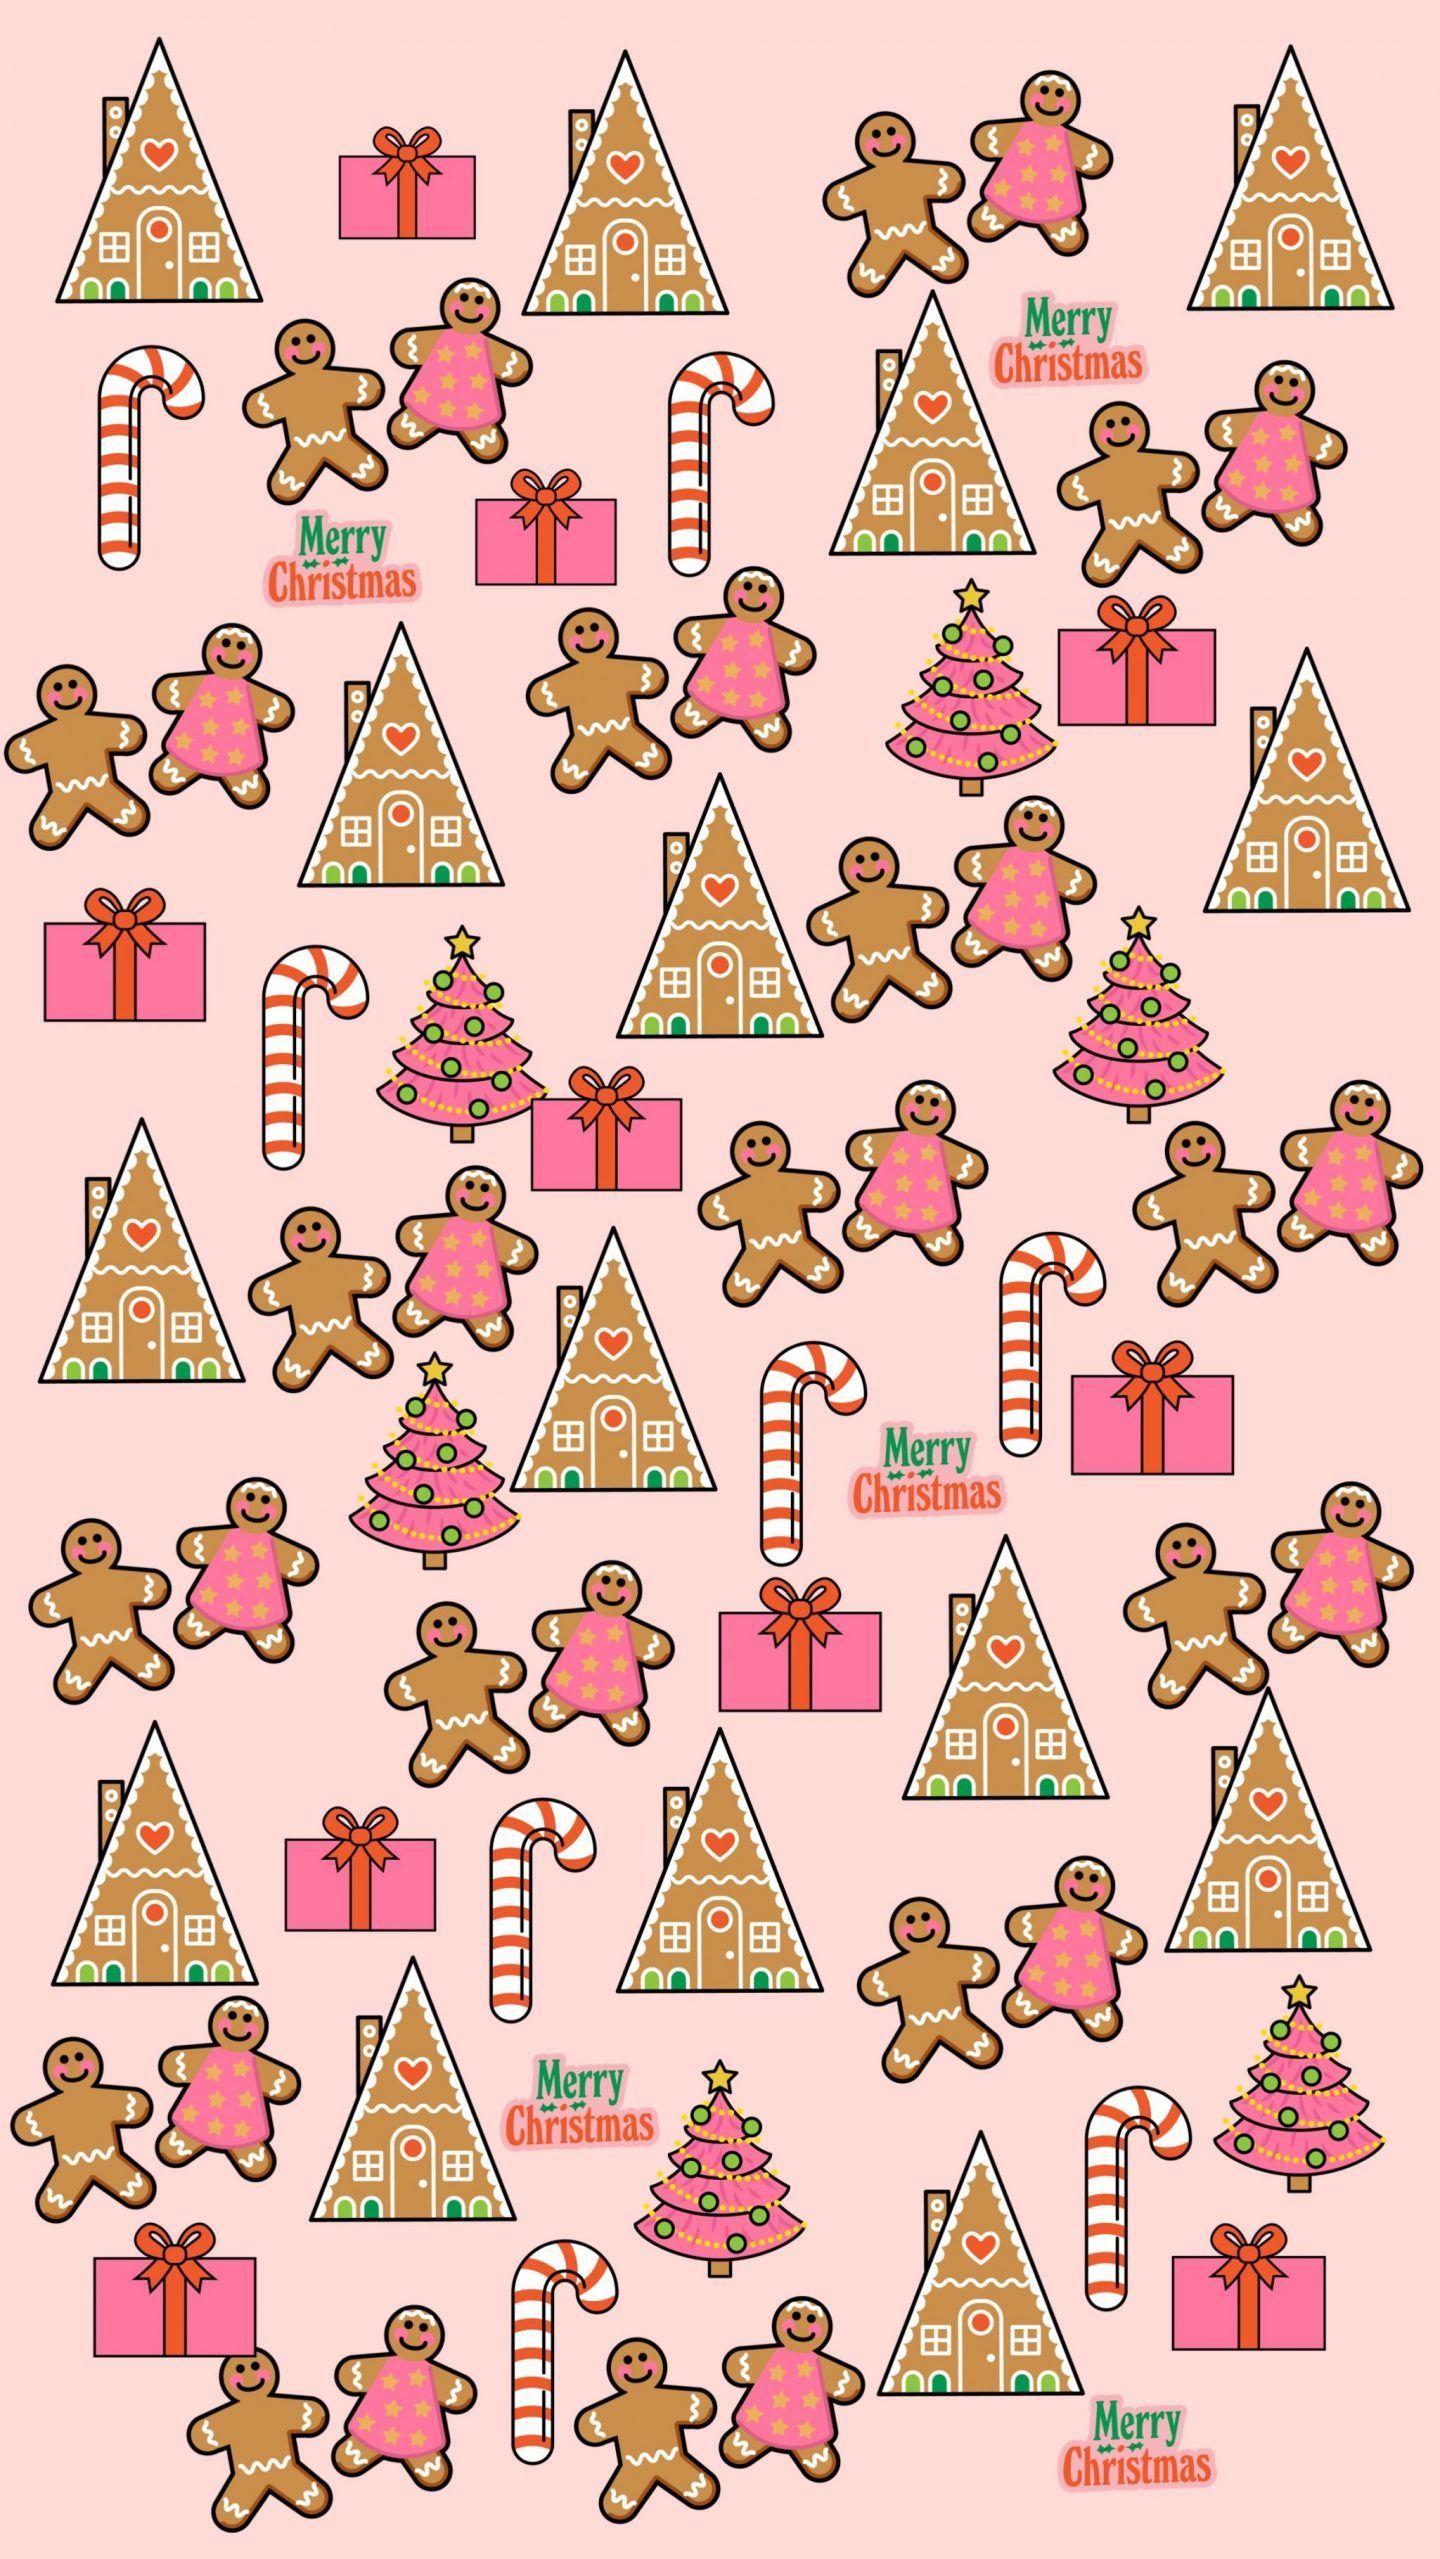 Free Christmas Phone Wallpapers - Corrie Bromfield - Free Christmas Phone Wallpapers - Corrie Bromfield -   15 beauty Background christmas ideas